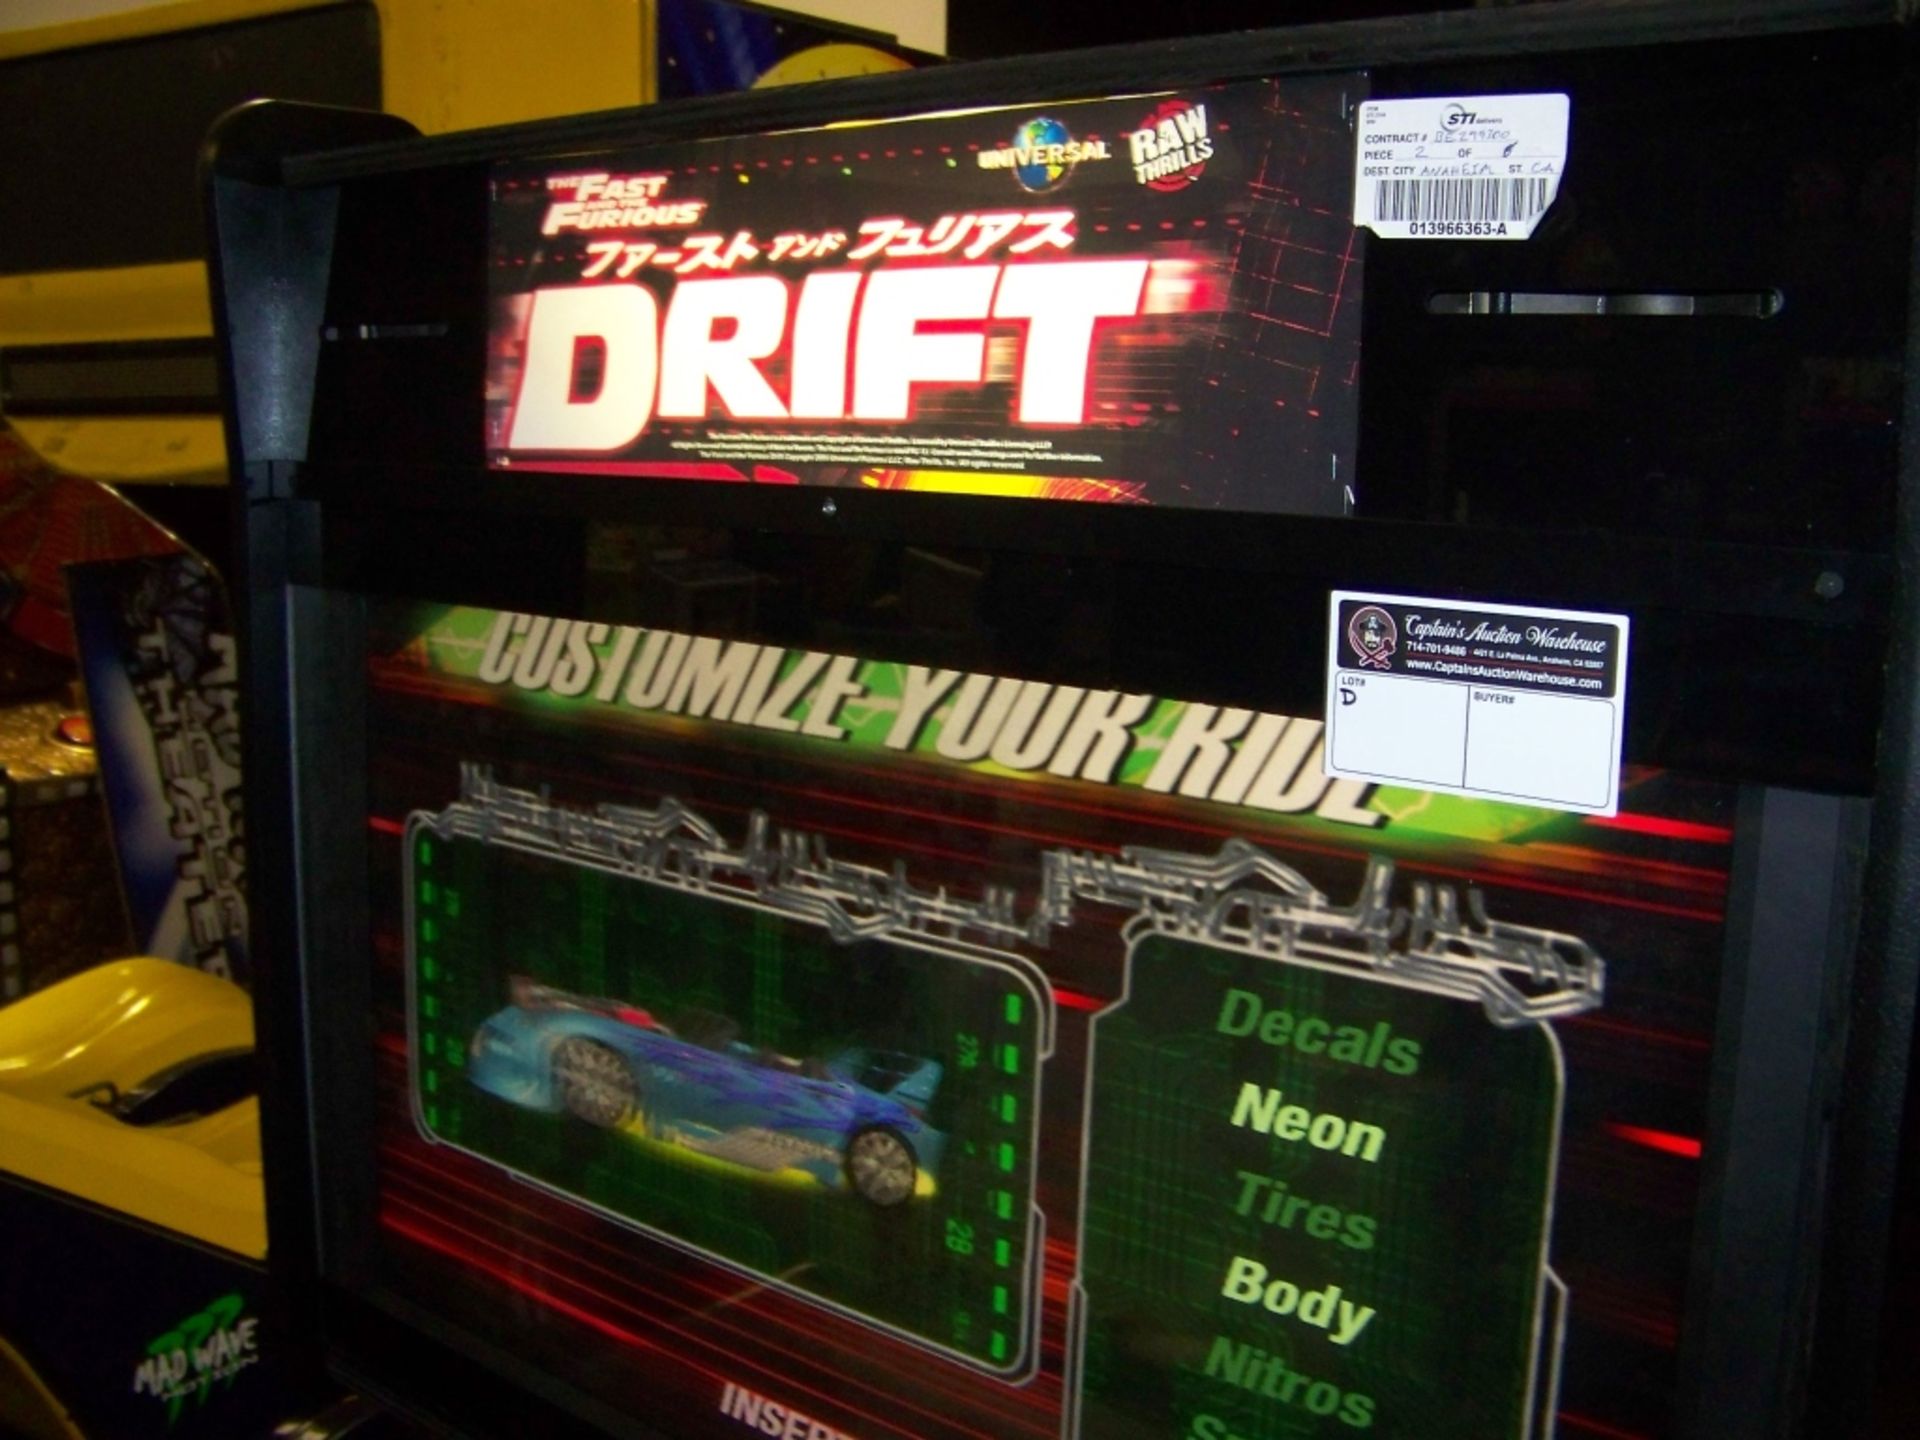 DRIFT FAST & FURIOUS DX 42" LCD RACING ARCADE GAME - Image 6 of 6